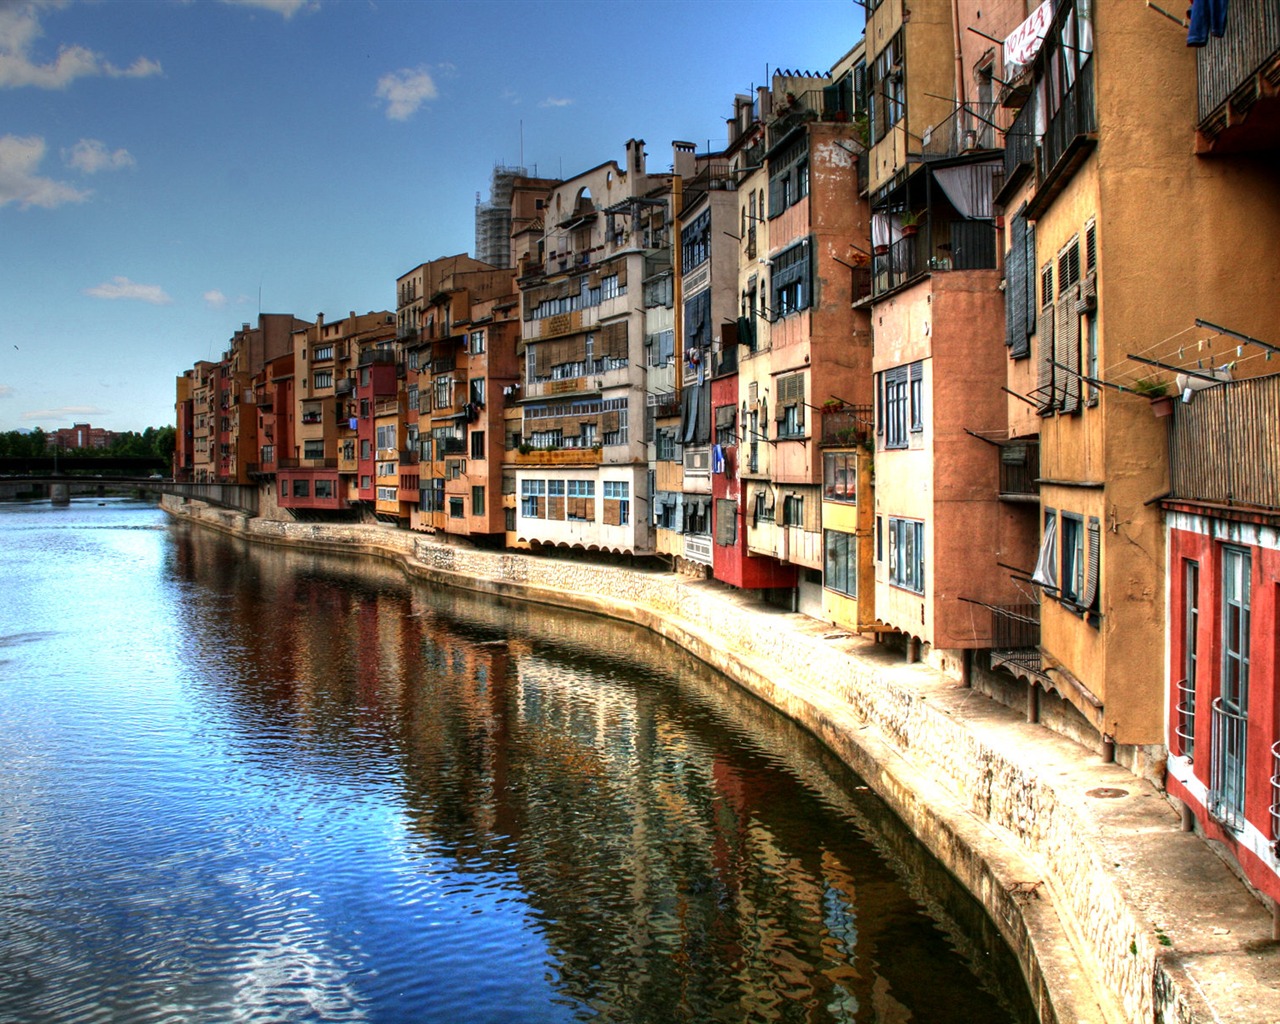 Spain Girona HDR-style wallpapers #1 - 1280x1024